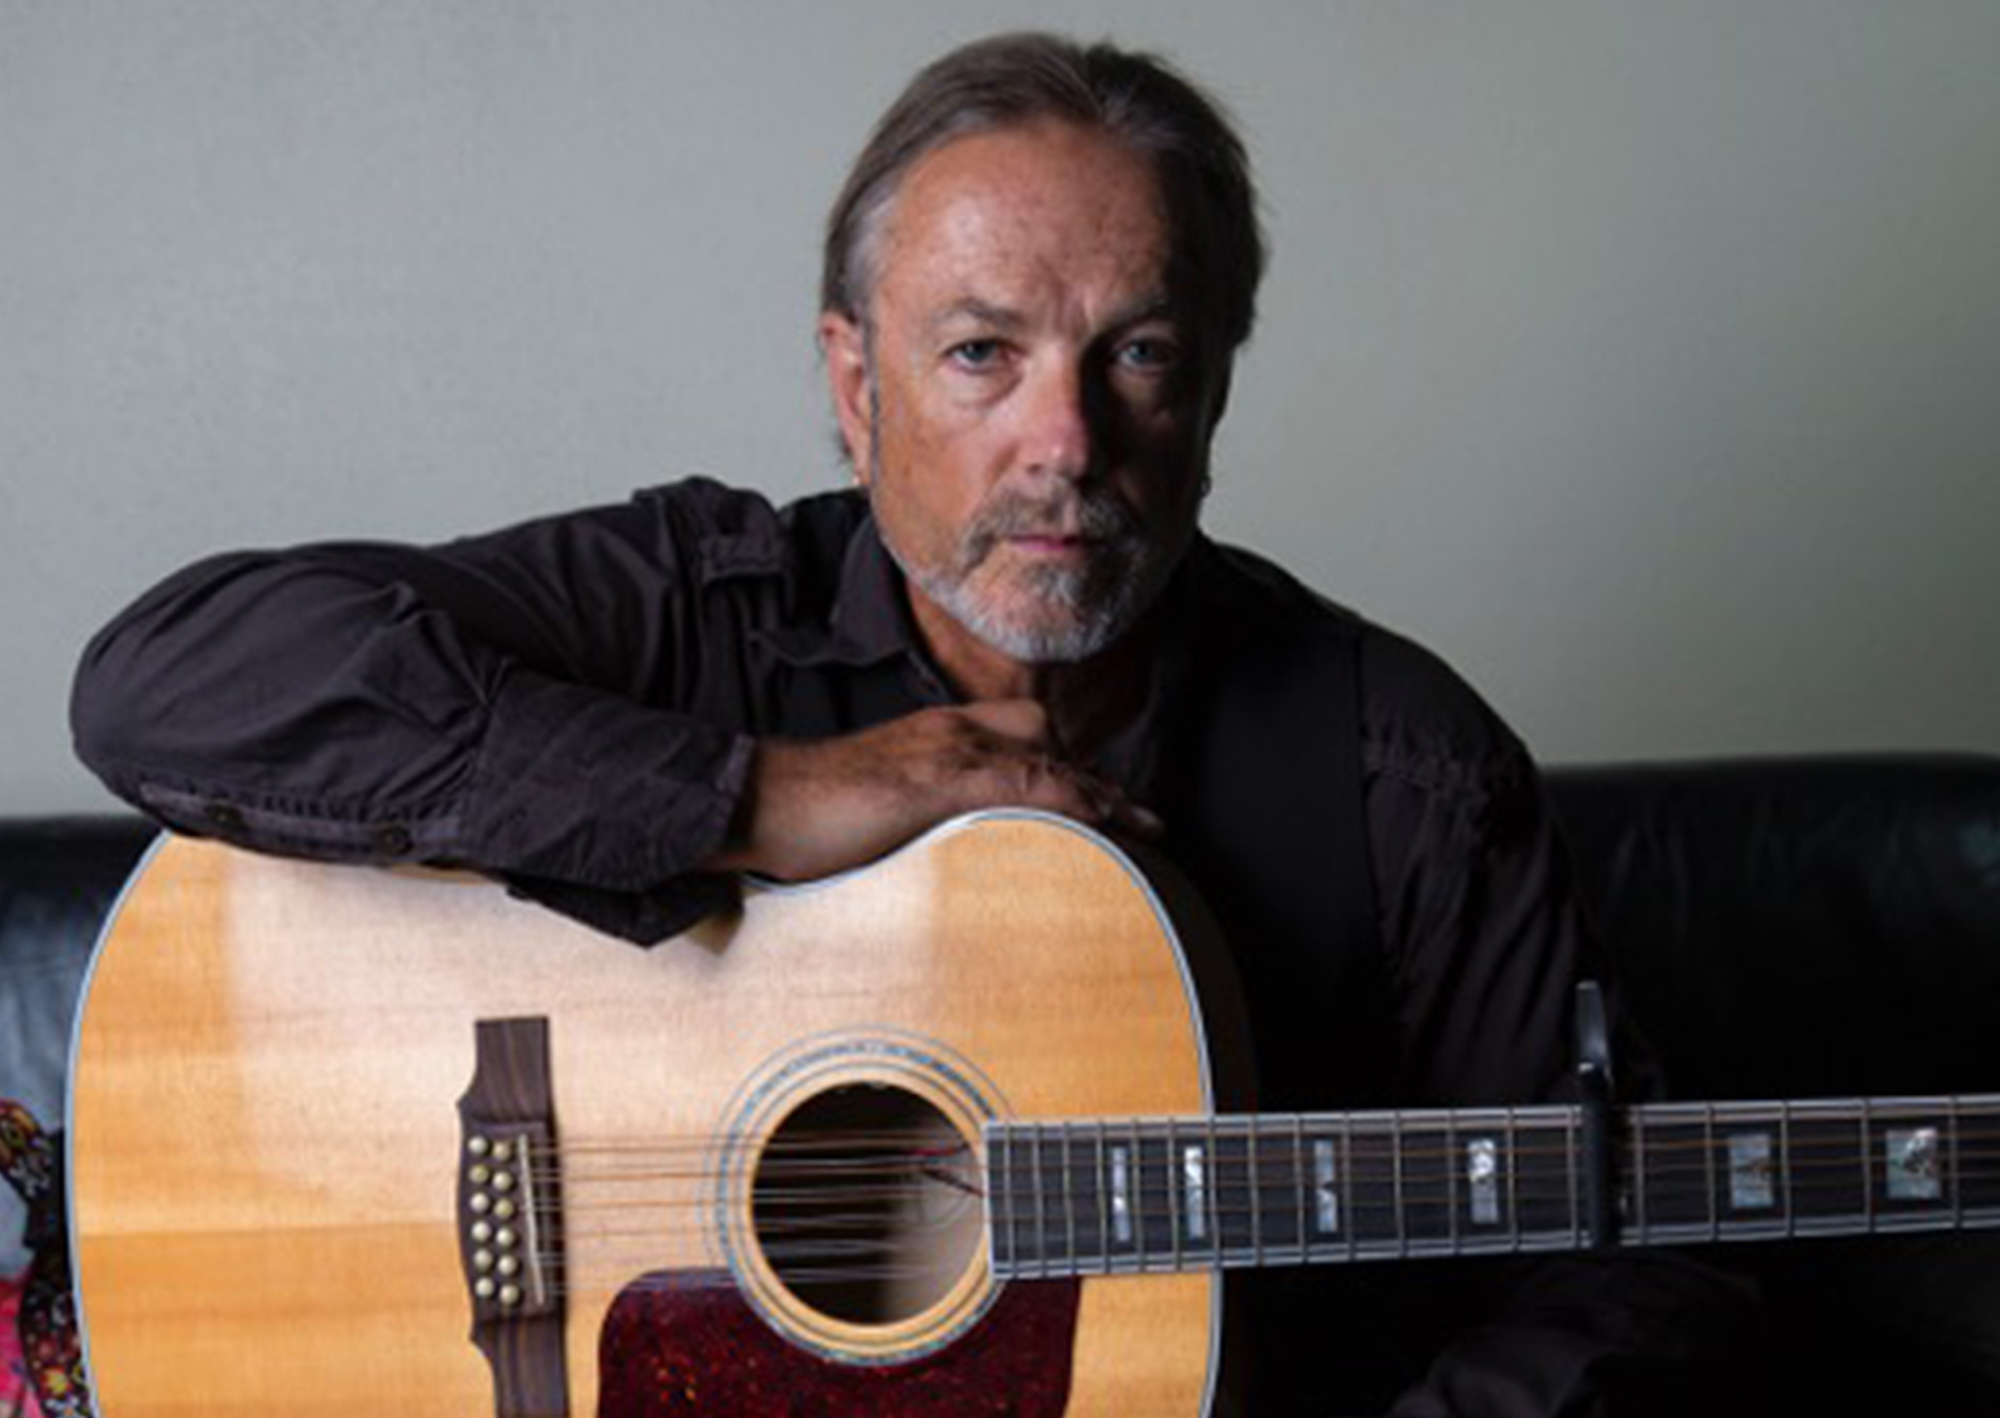 Steve Kilbey and The Winged Heels Invite Listeners Into ‘The Hall of Counterfeits’